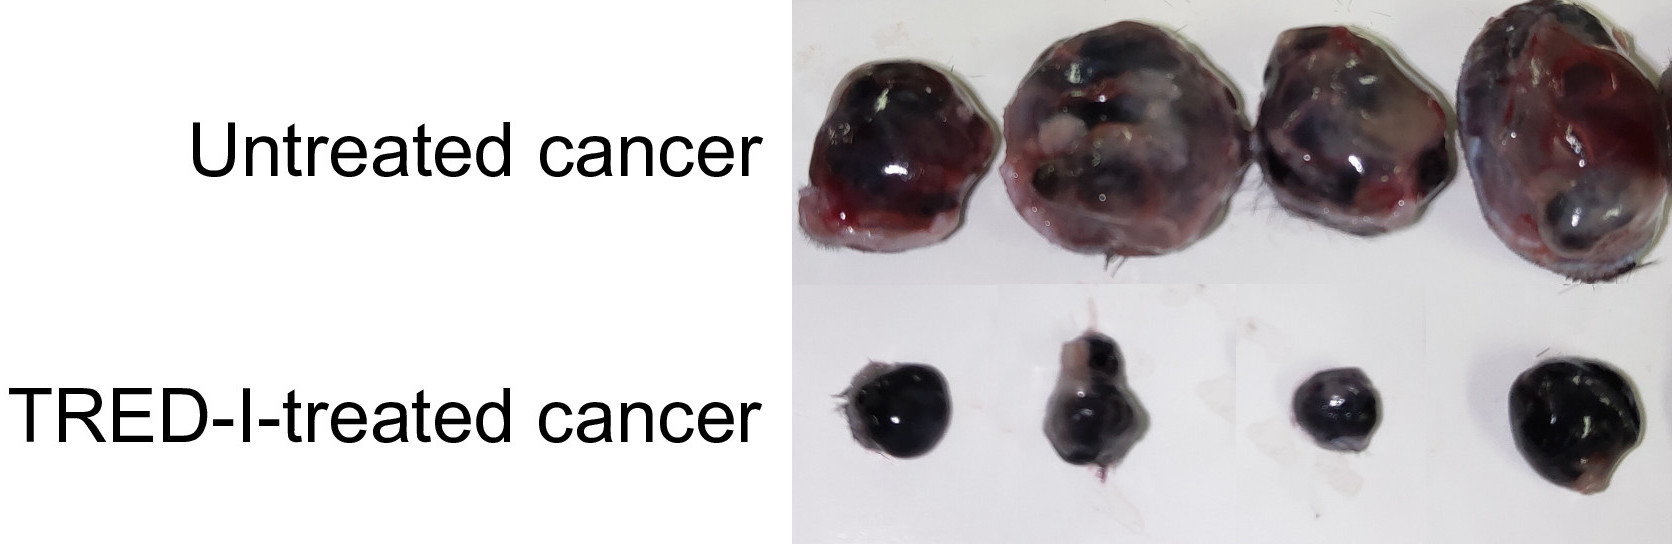 Compared with untreated cancer, the TRED-I system significantly reduced cancer size in mice models. (Xin Sun, et al. Proceedings of the National Academy of Sciences. January 29, 2024)